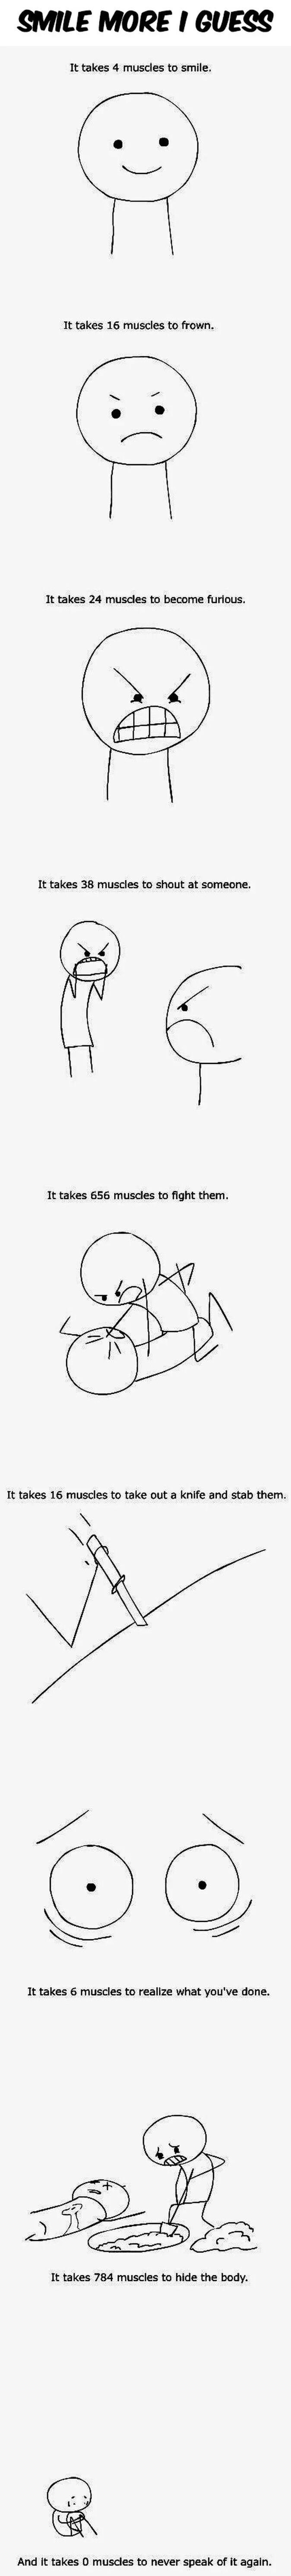 Fun guide on how our muscles work